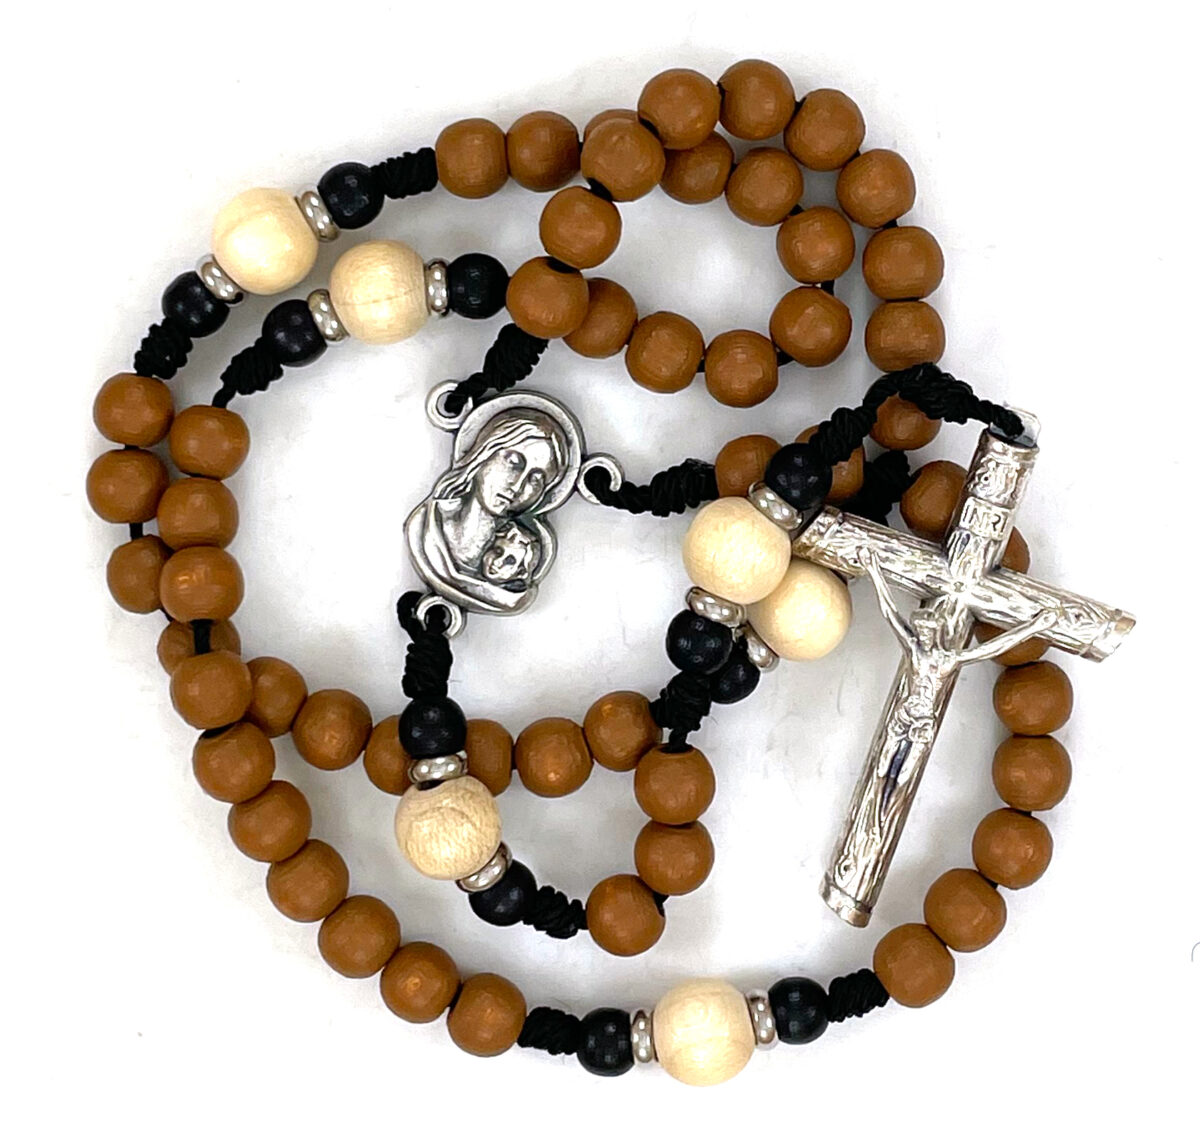 Small Beige Accent Rosary ($17.99)